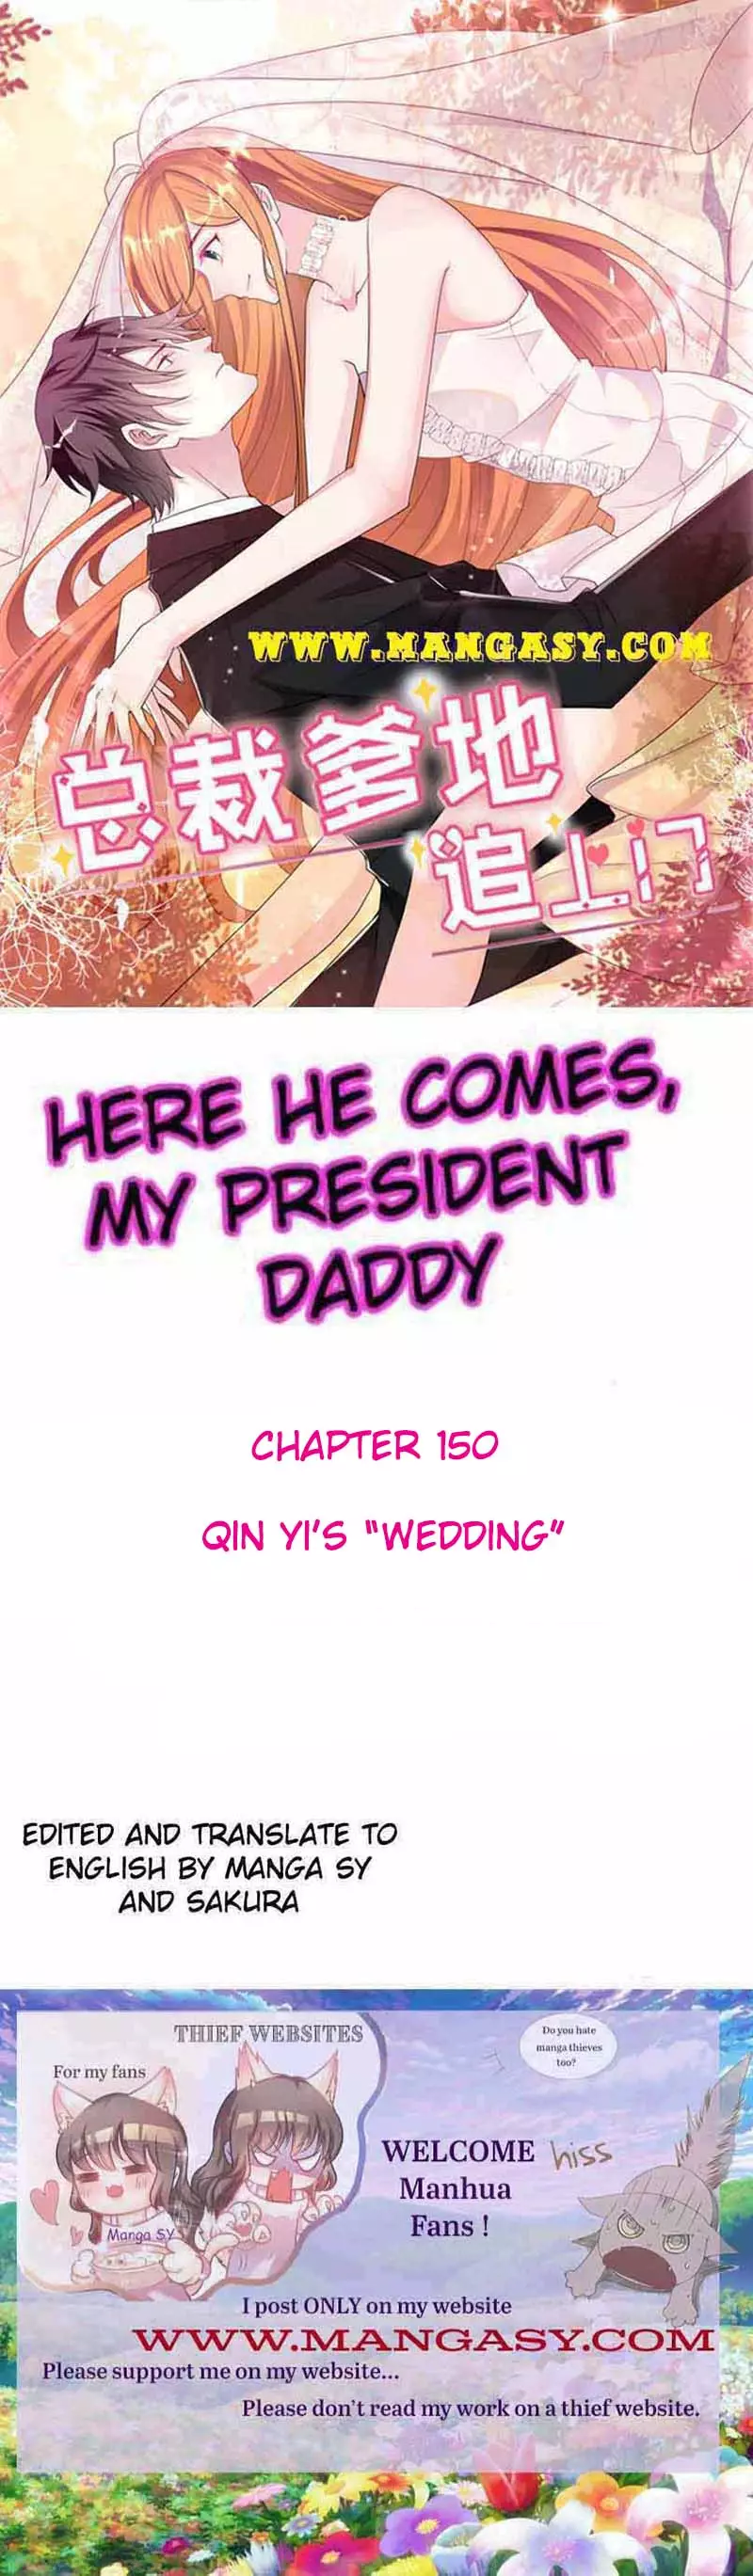 President Daddy Is Chasing You - 150 page 1-1e7245d2